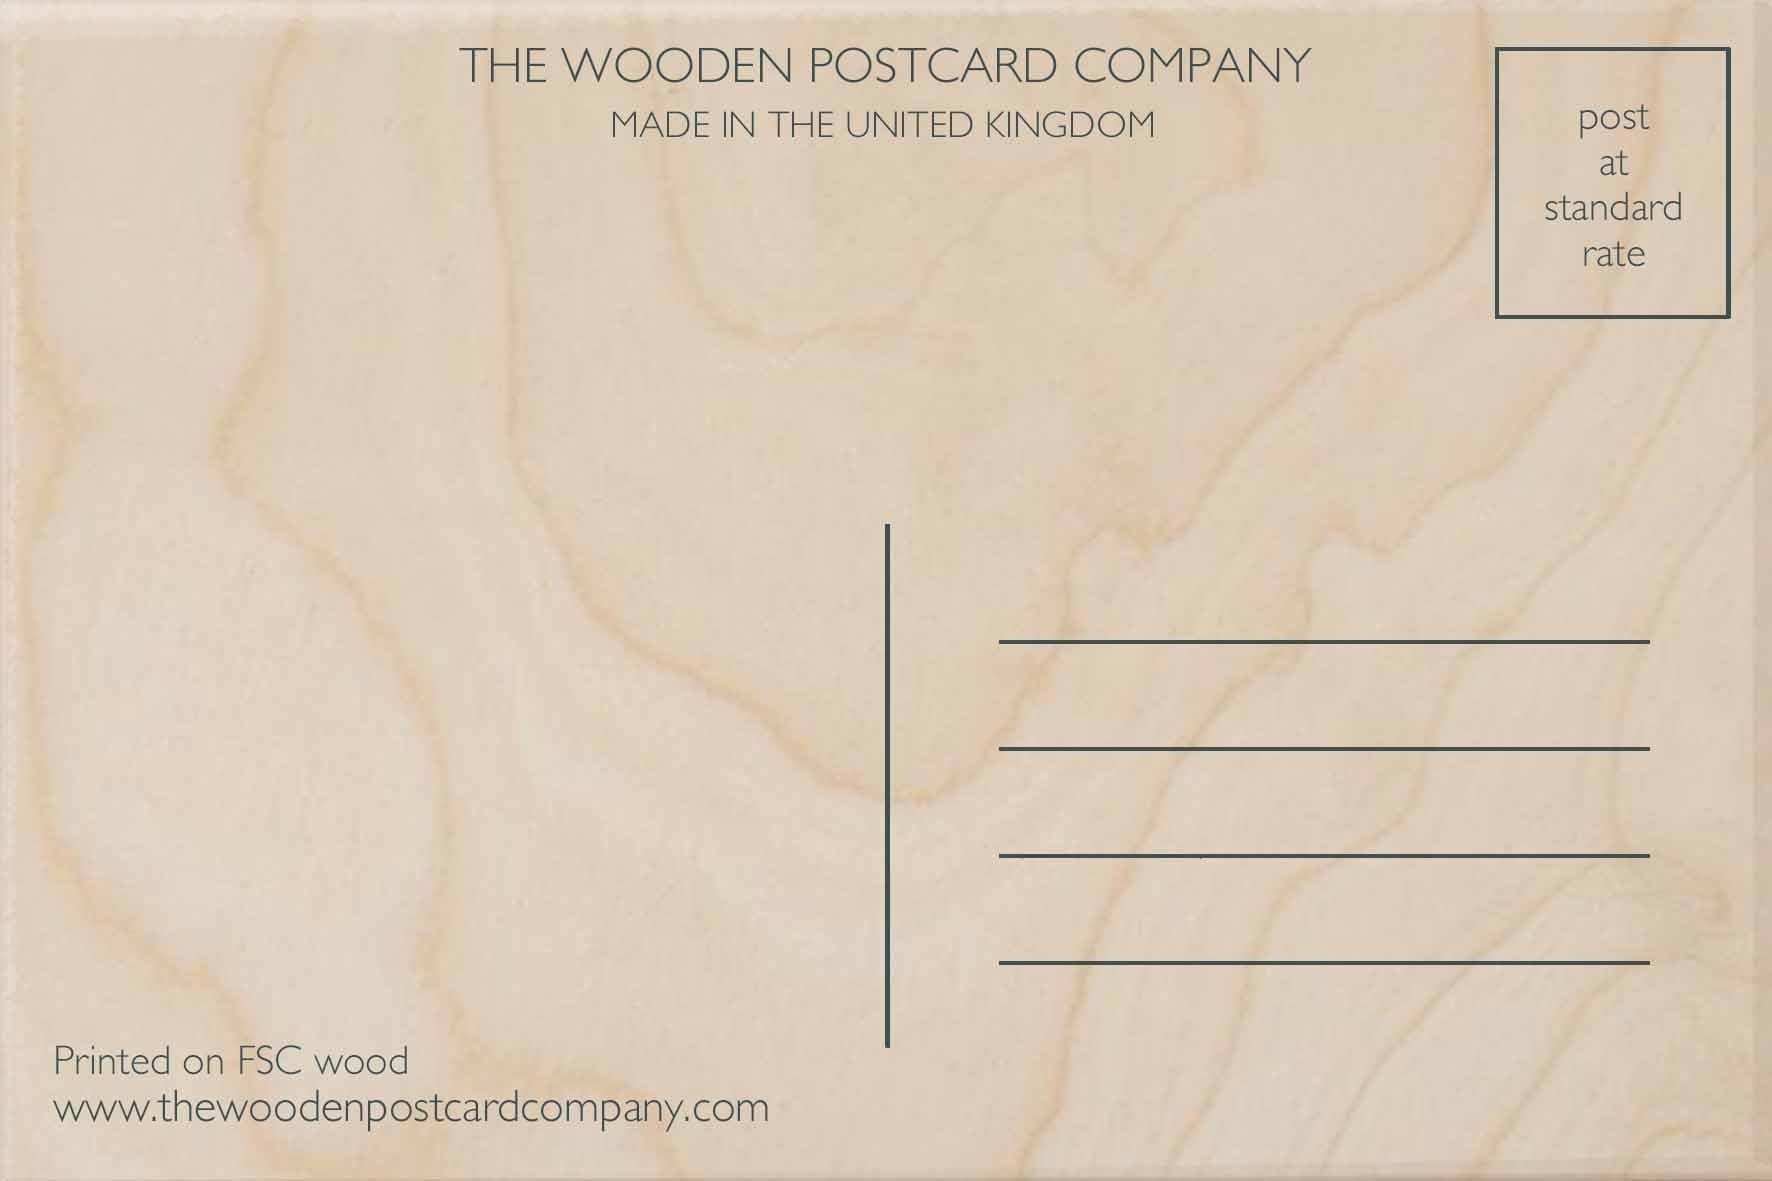 The Wooden Postcard Company Postcard Dinner Time Wooden Postcard (7078260244640)